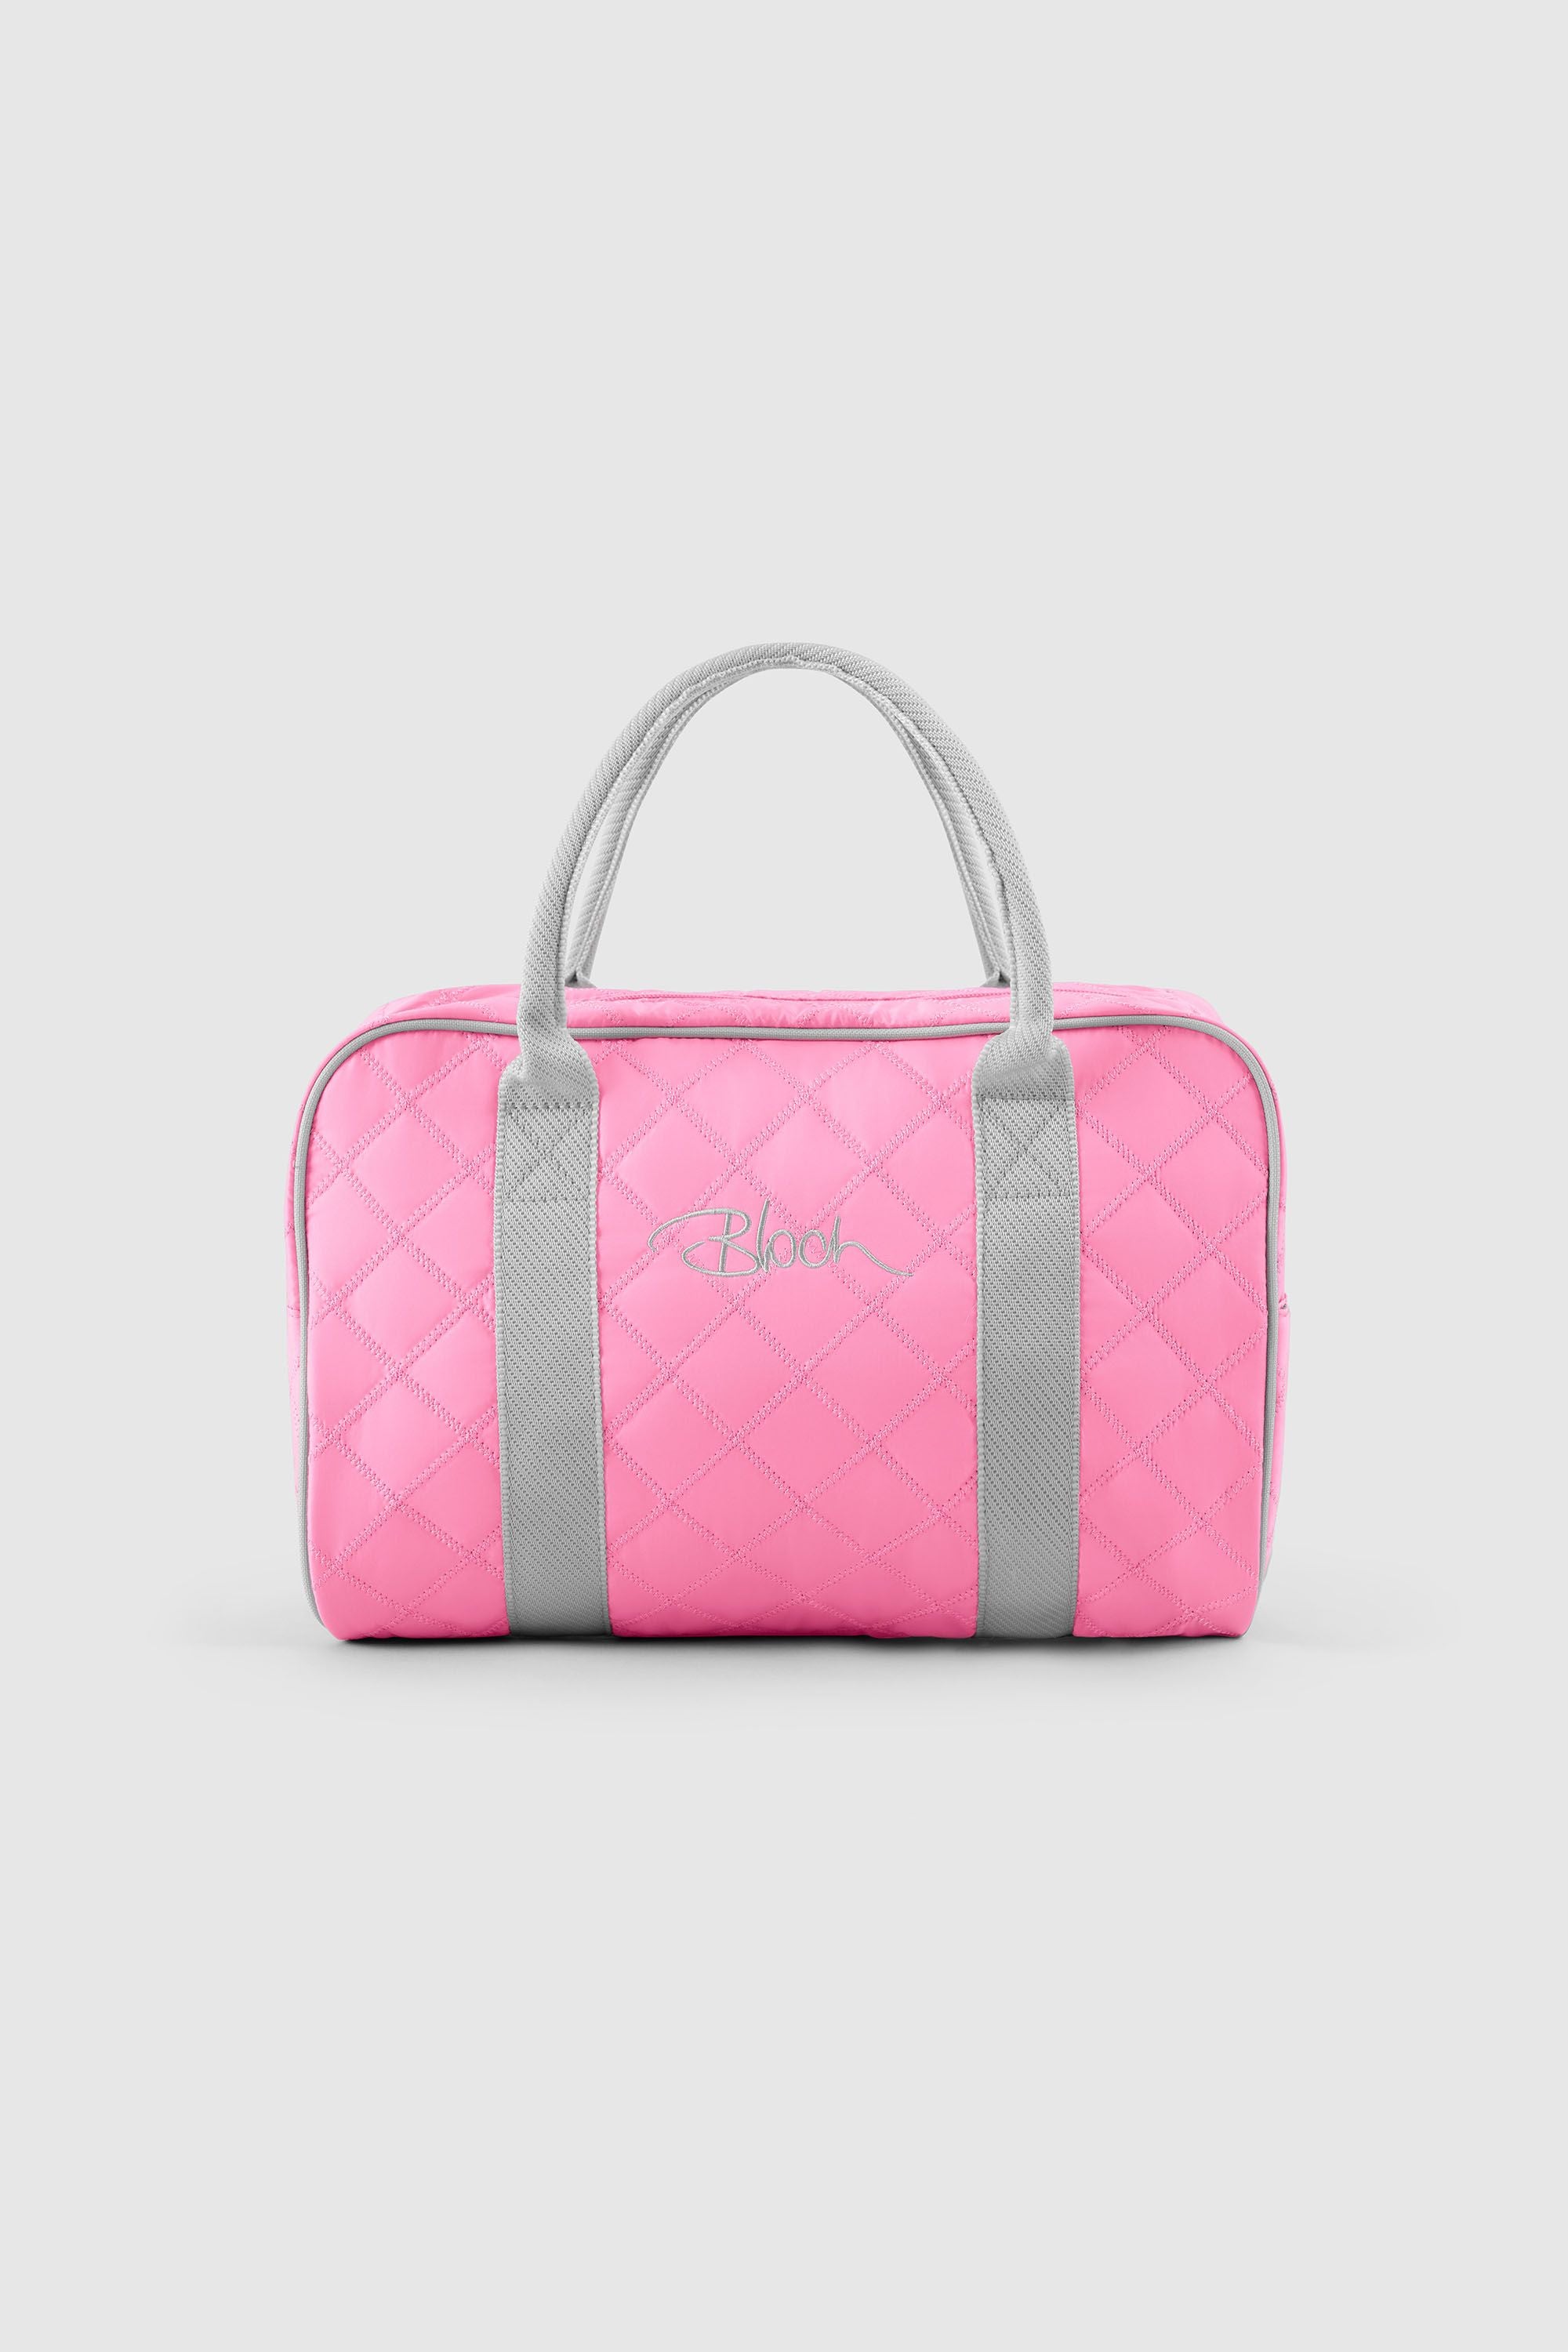 Bloch Quilted Encore Bag, Pink Nylon